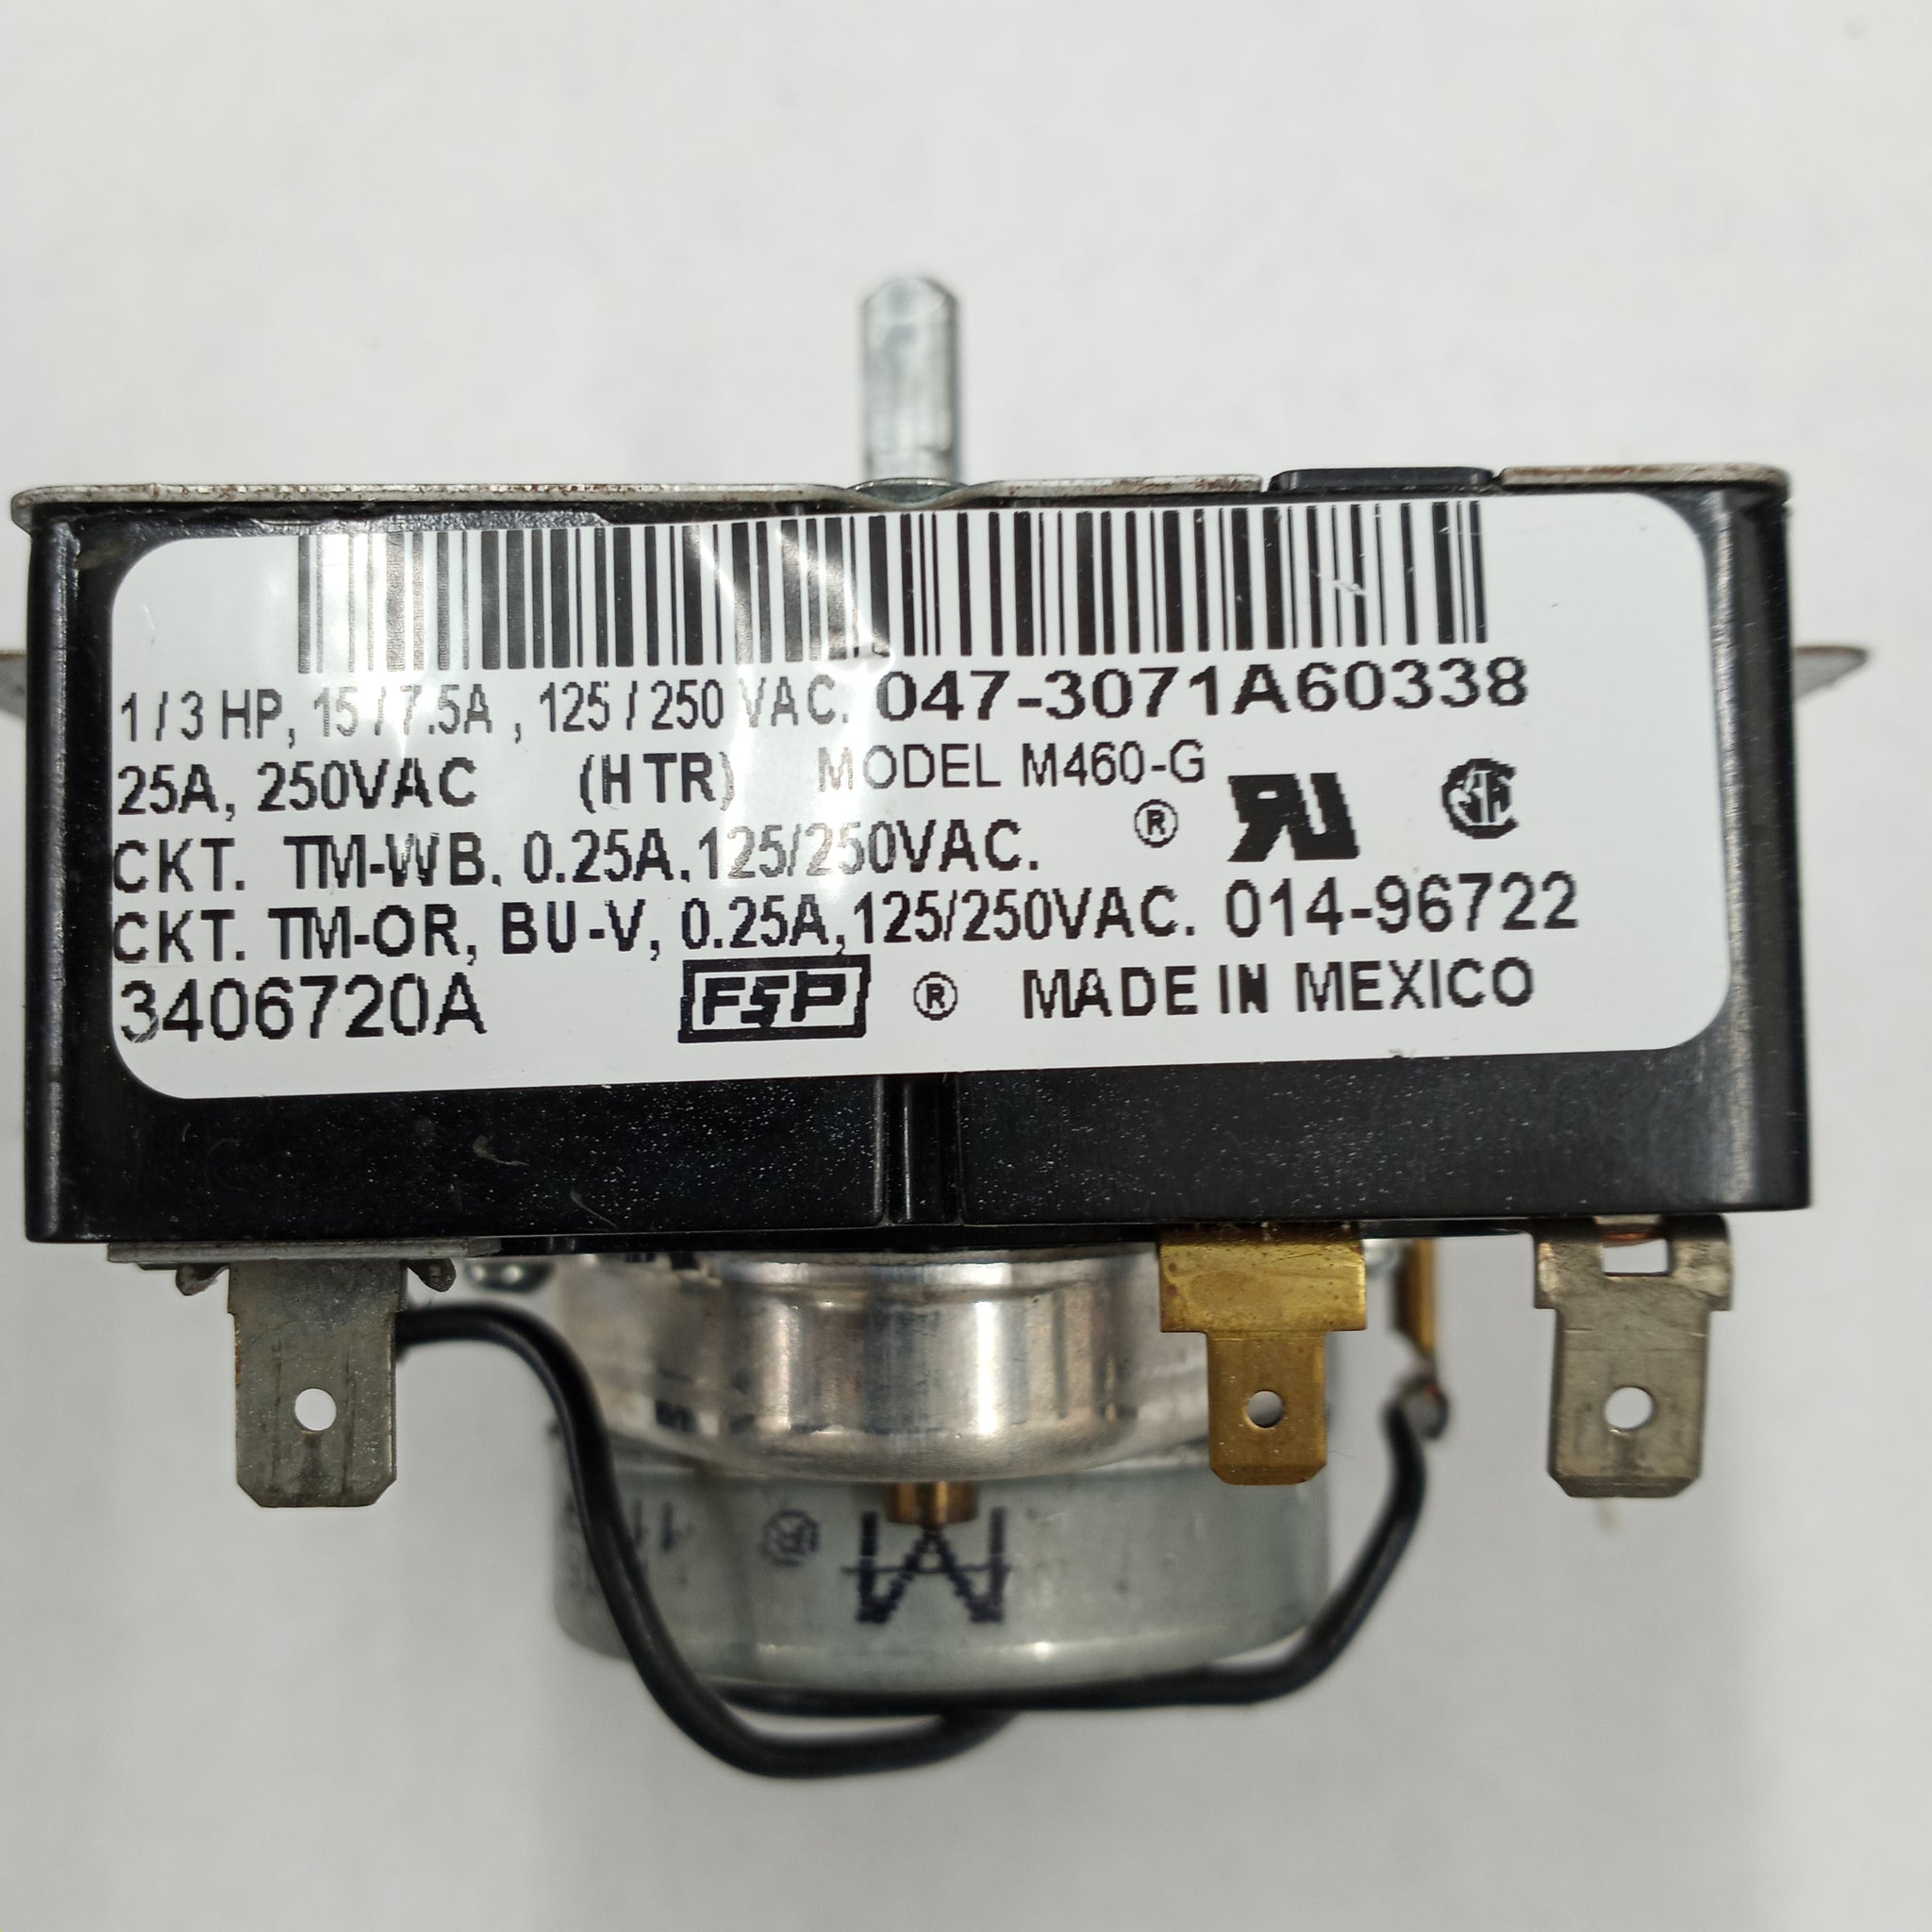 Whirlpool-Dryer-Timer-WP3406720-3406720A